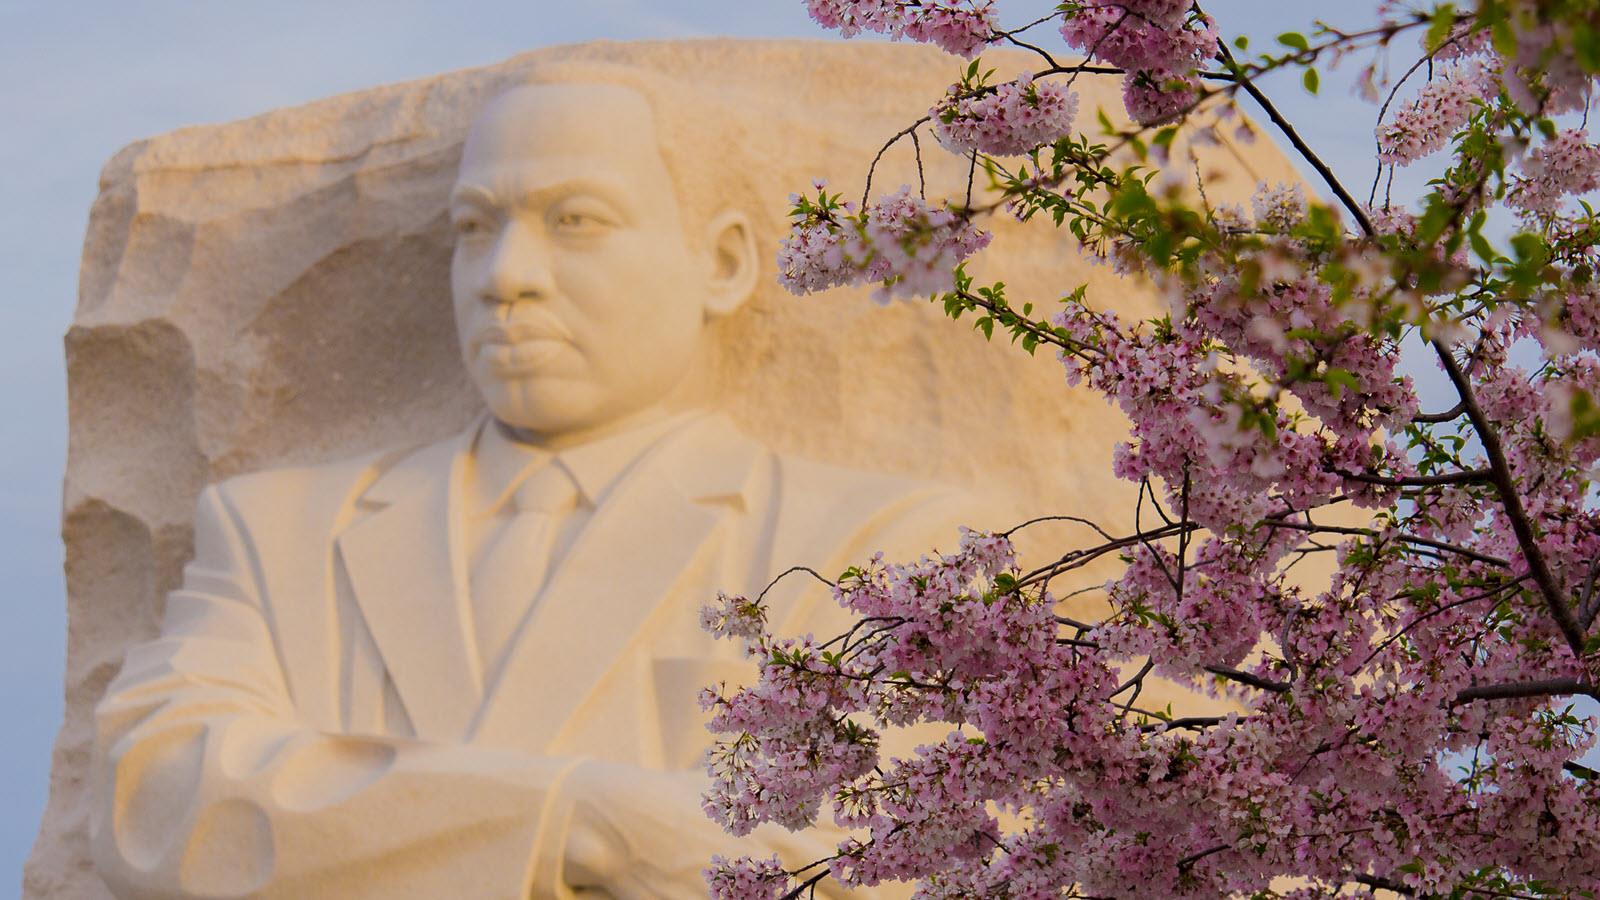 National memorial statue of Martin Luther King Jr. with cherry blossom branches